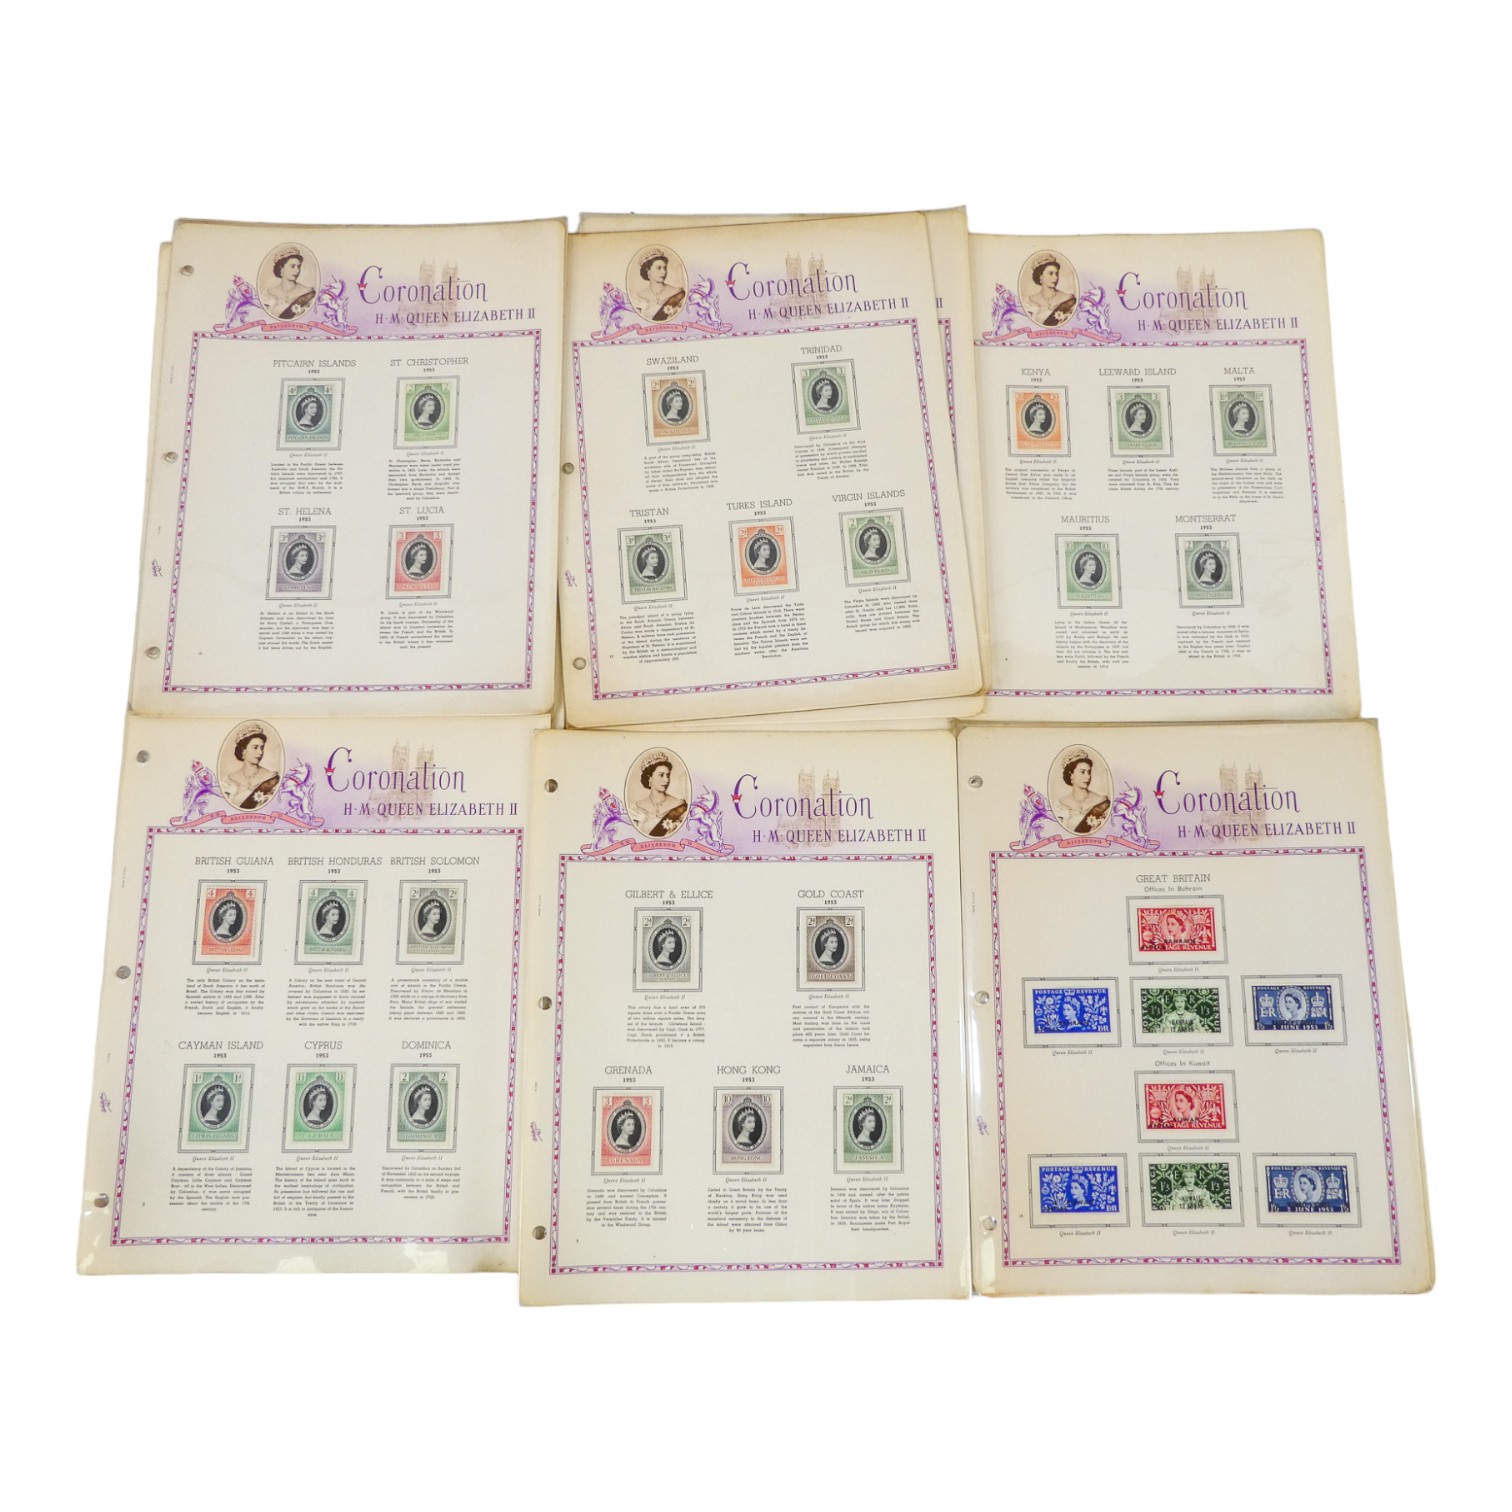 1953 CORONATION STAMPS - A collection of omnibus coronation stamps mounted in special album, lacks